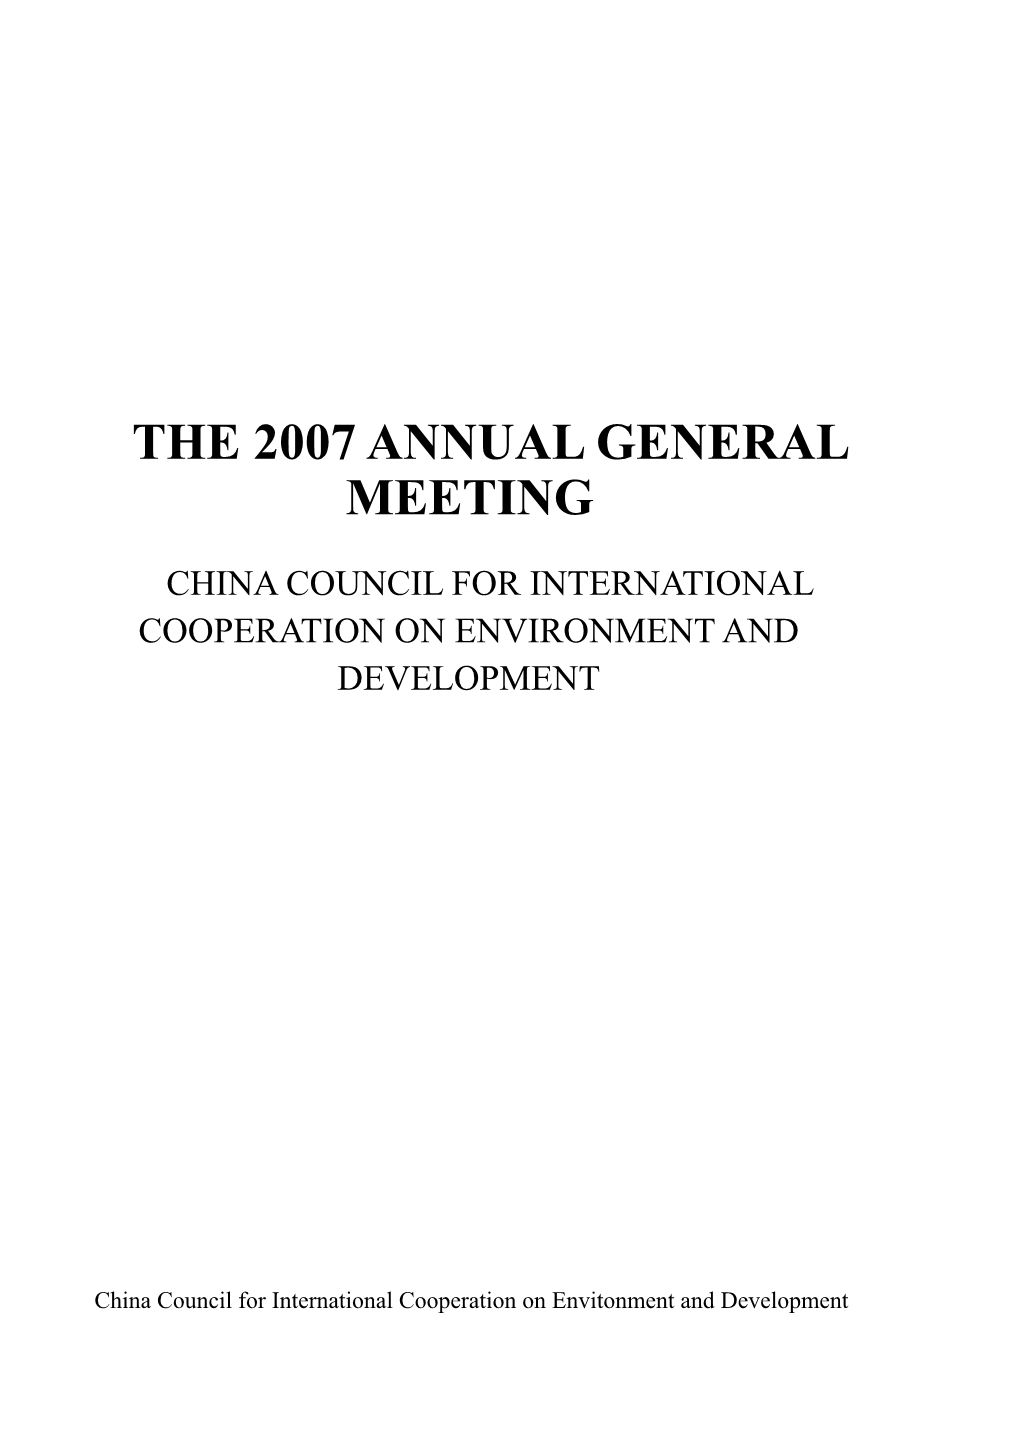 The 2007 Annual General Meeting